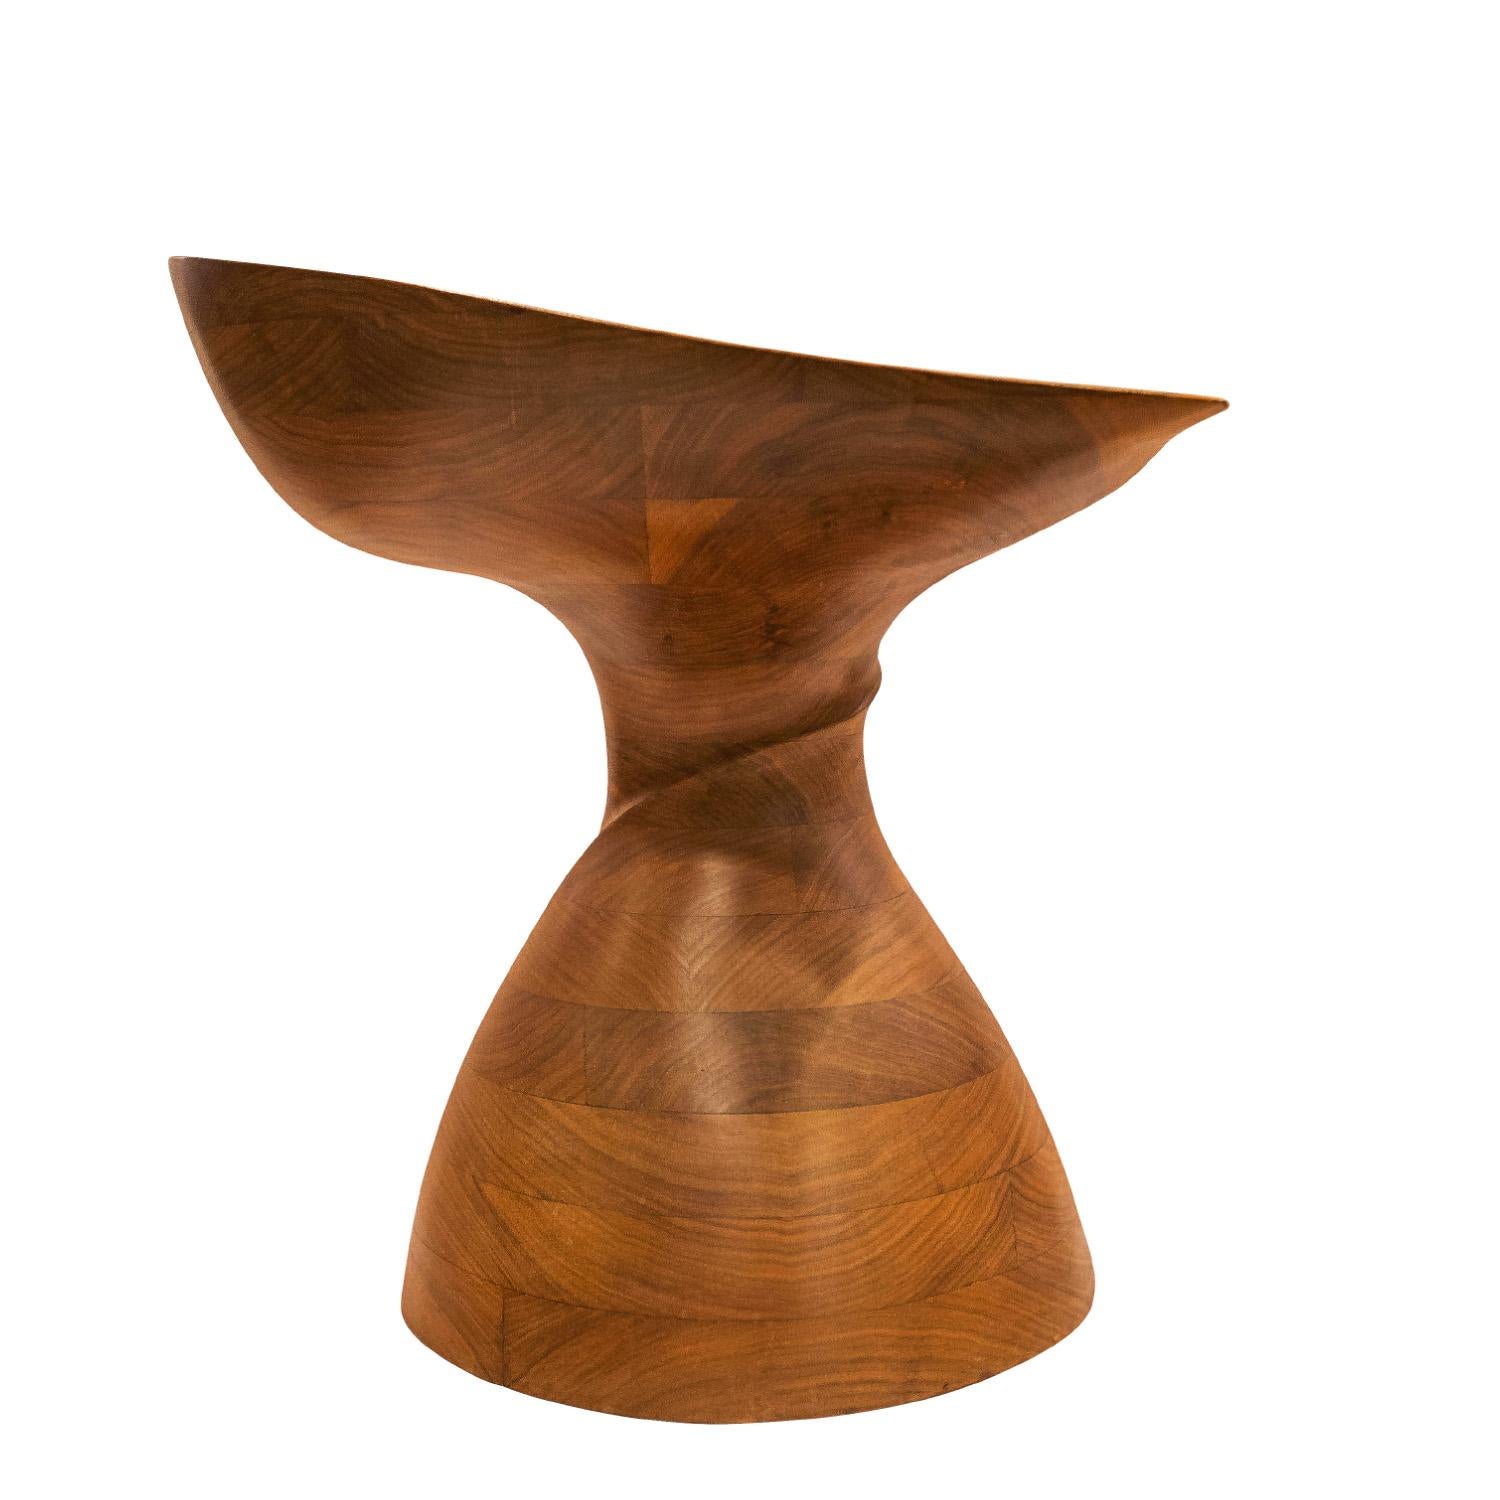 Contemporary Michael Coffey Rare Set of 6 Hand-Carved Stools in Walnut 2007 (Signed) For Sale